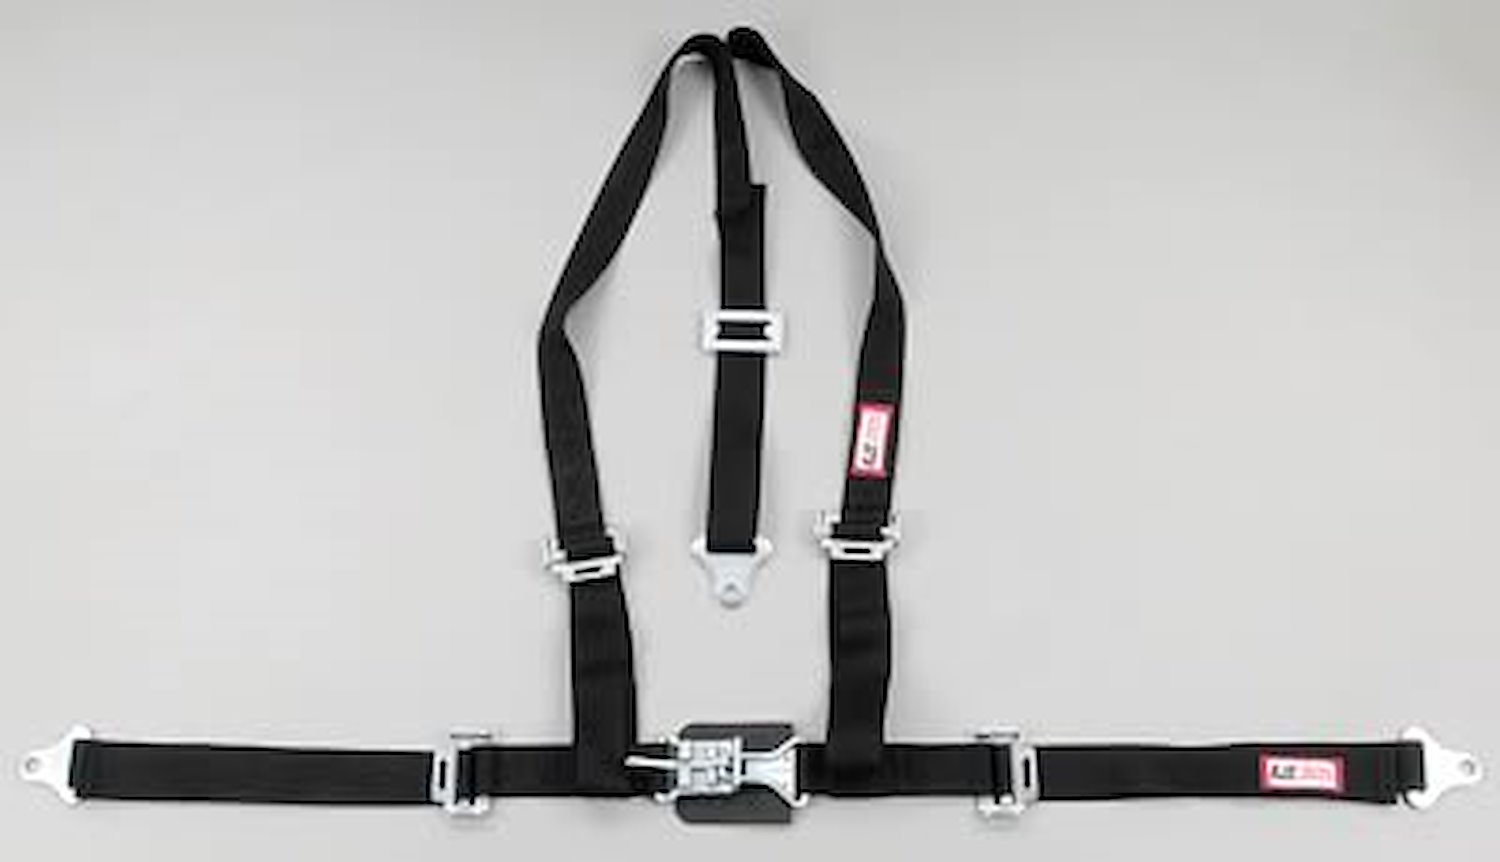 NON-SFI L&L HARNESS 3 PULL DOWN Lap Belt w/adjuster 2 S.H. Individual FLOOR Mount ALL WRAP ENDS ORANGE